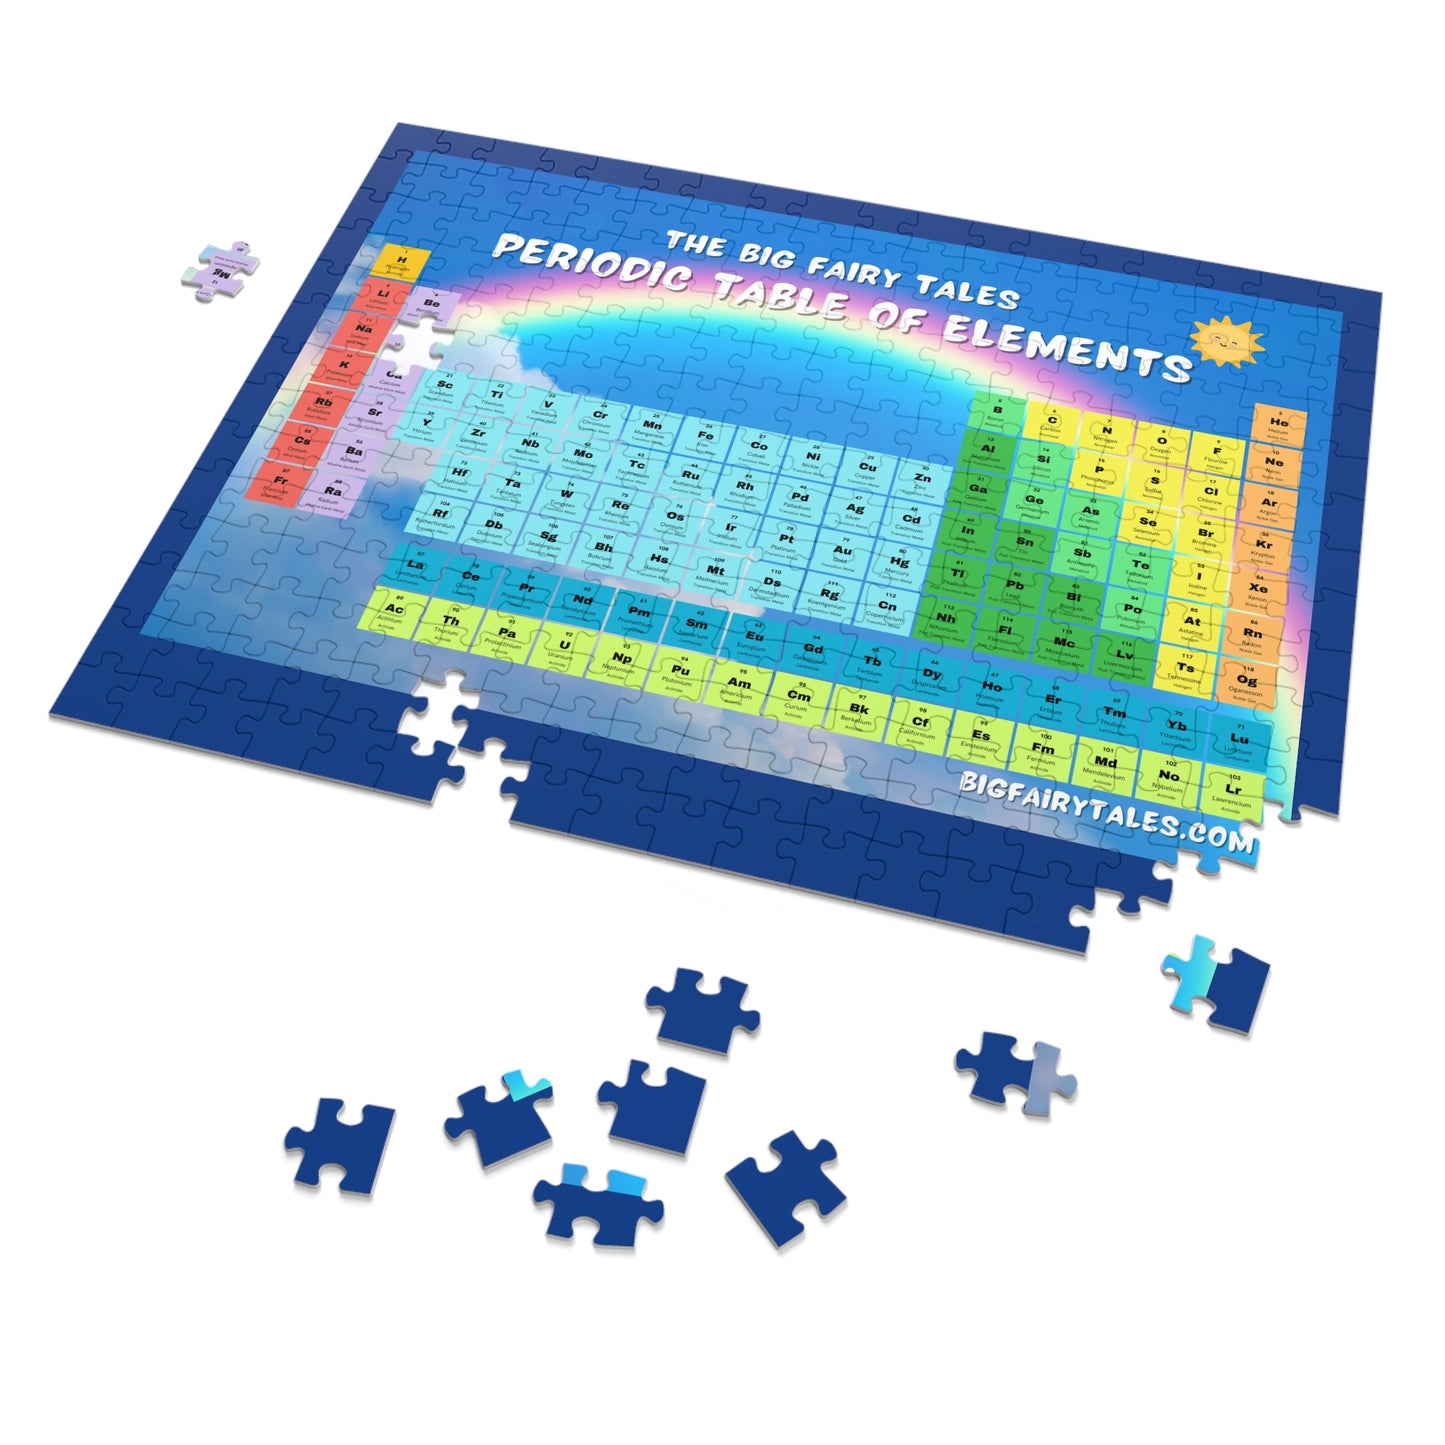 Big Fairy Tales By Schatar - STEM Puzzle - Periodic Table Of Elements